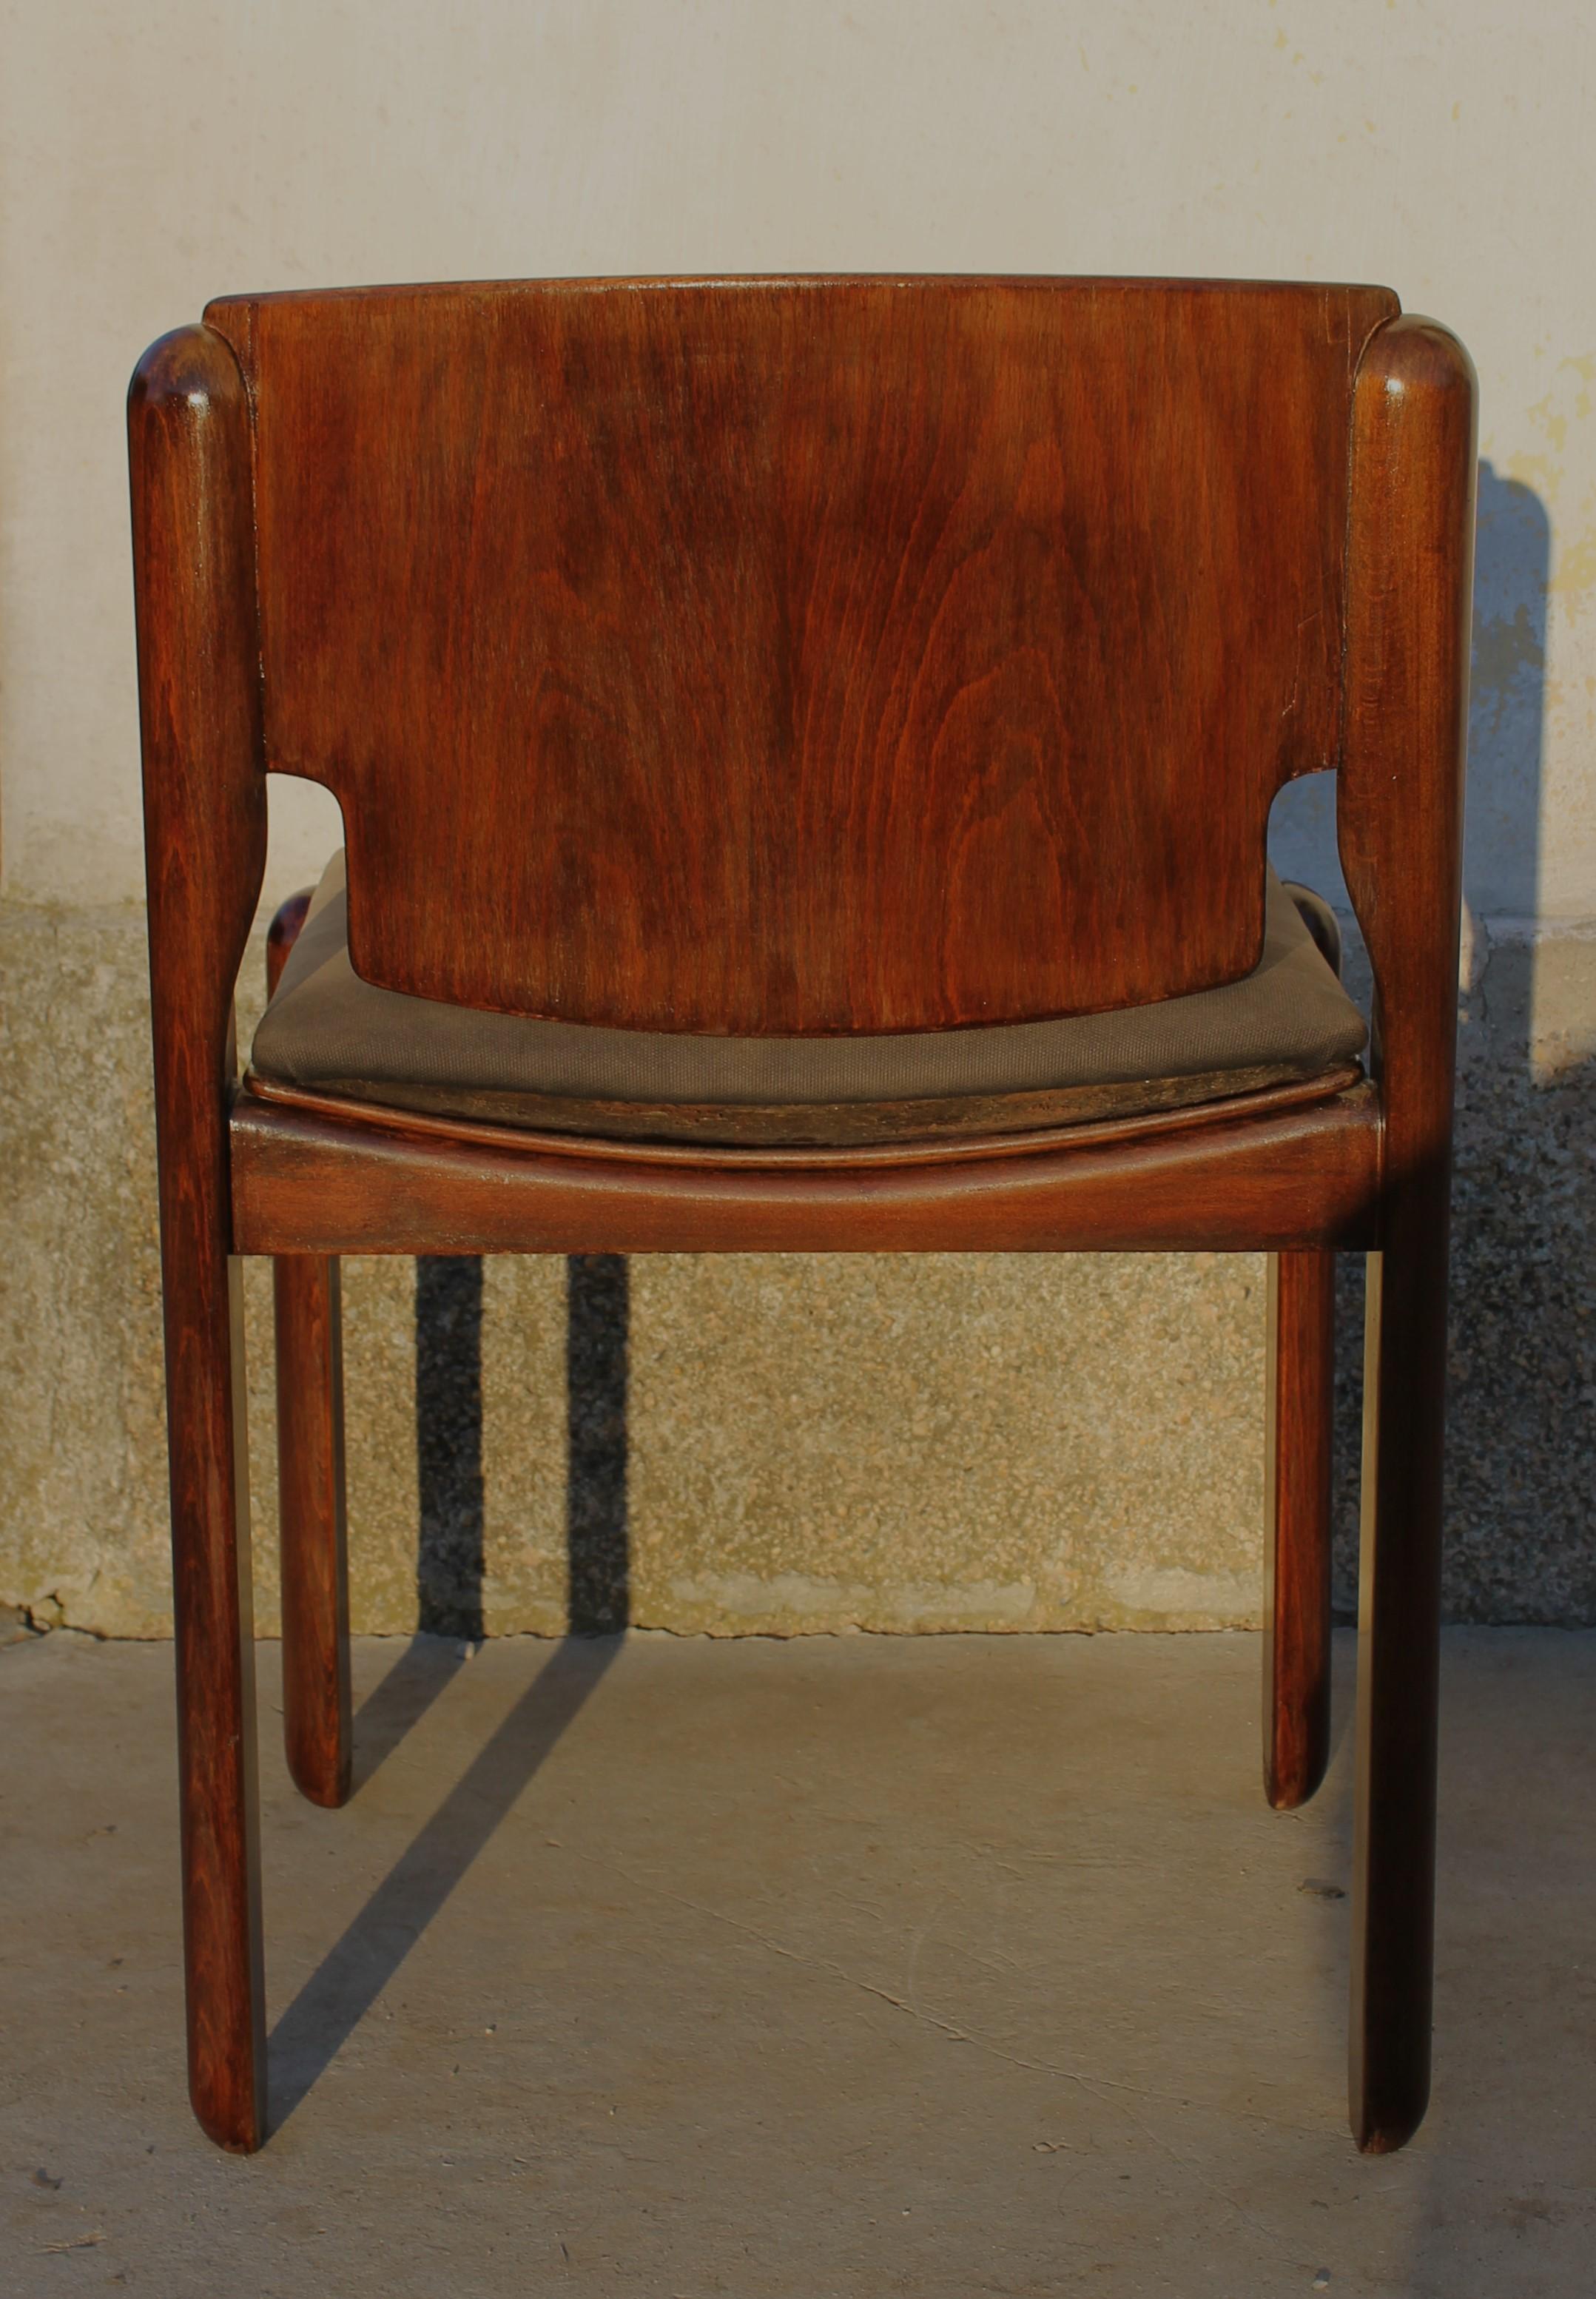 Italian  Cassina walnut chair Mod. 122 by Vico Magistretti Italy 60s (six available) For Sale